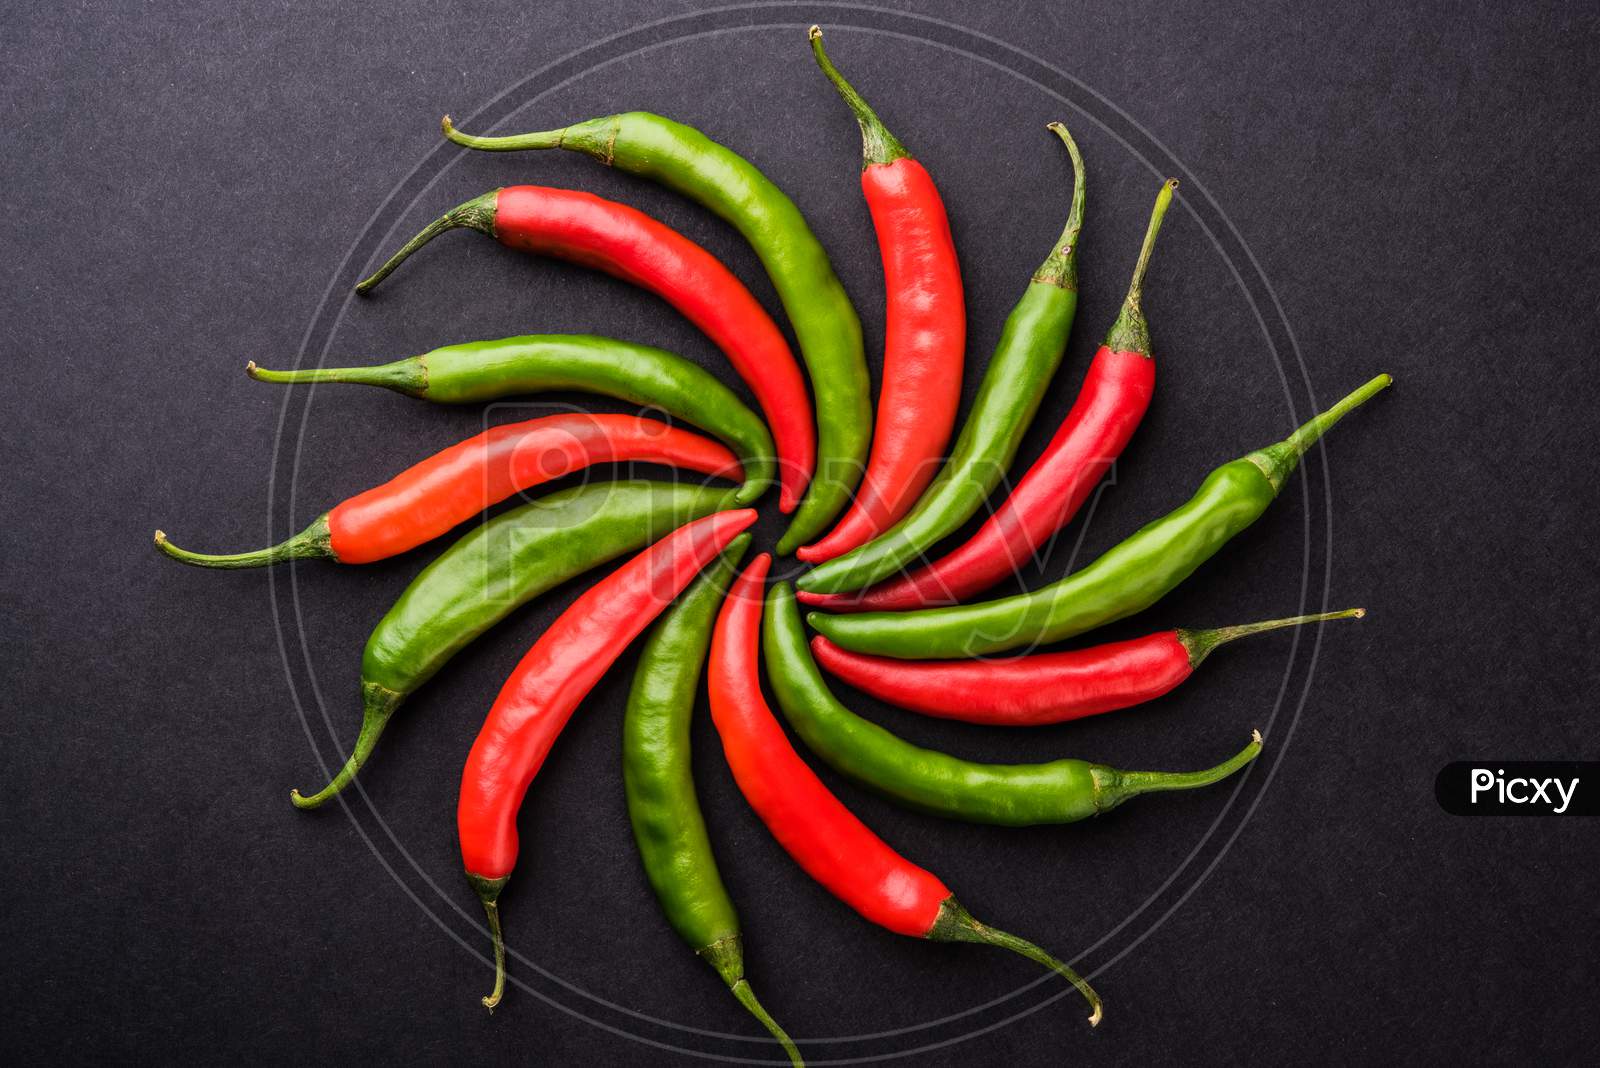 Red / Green hot chillies / mirchi